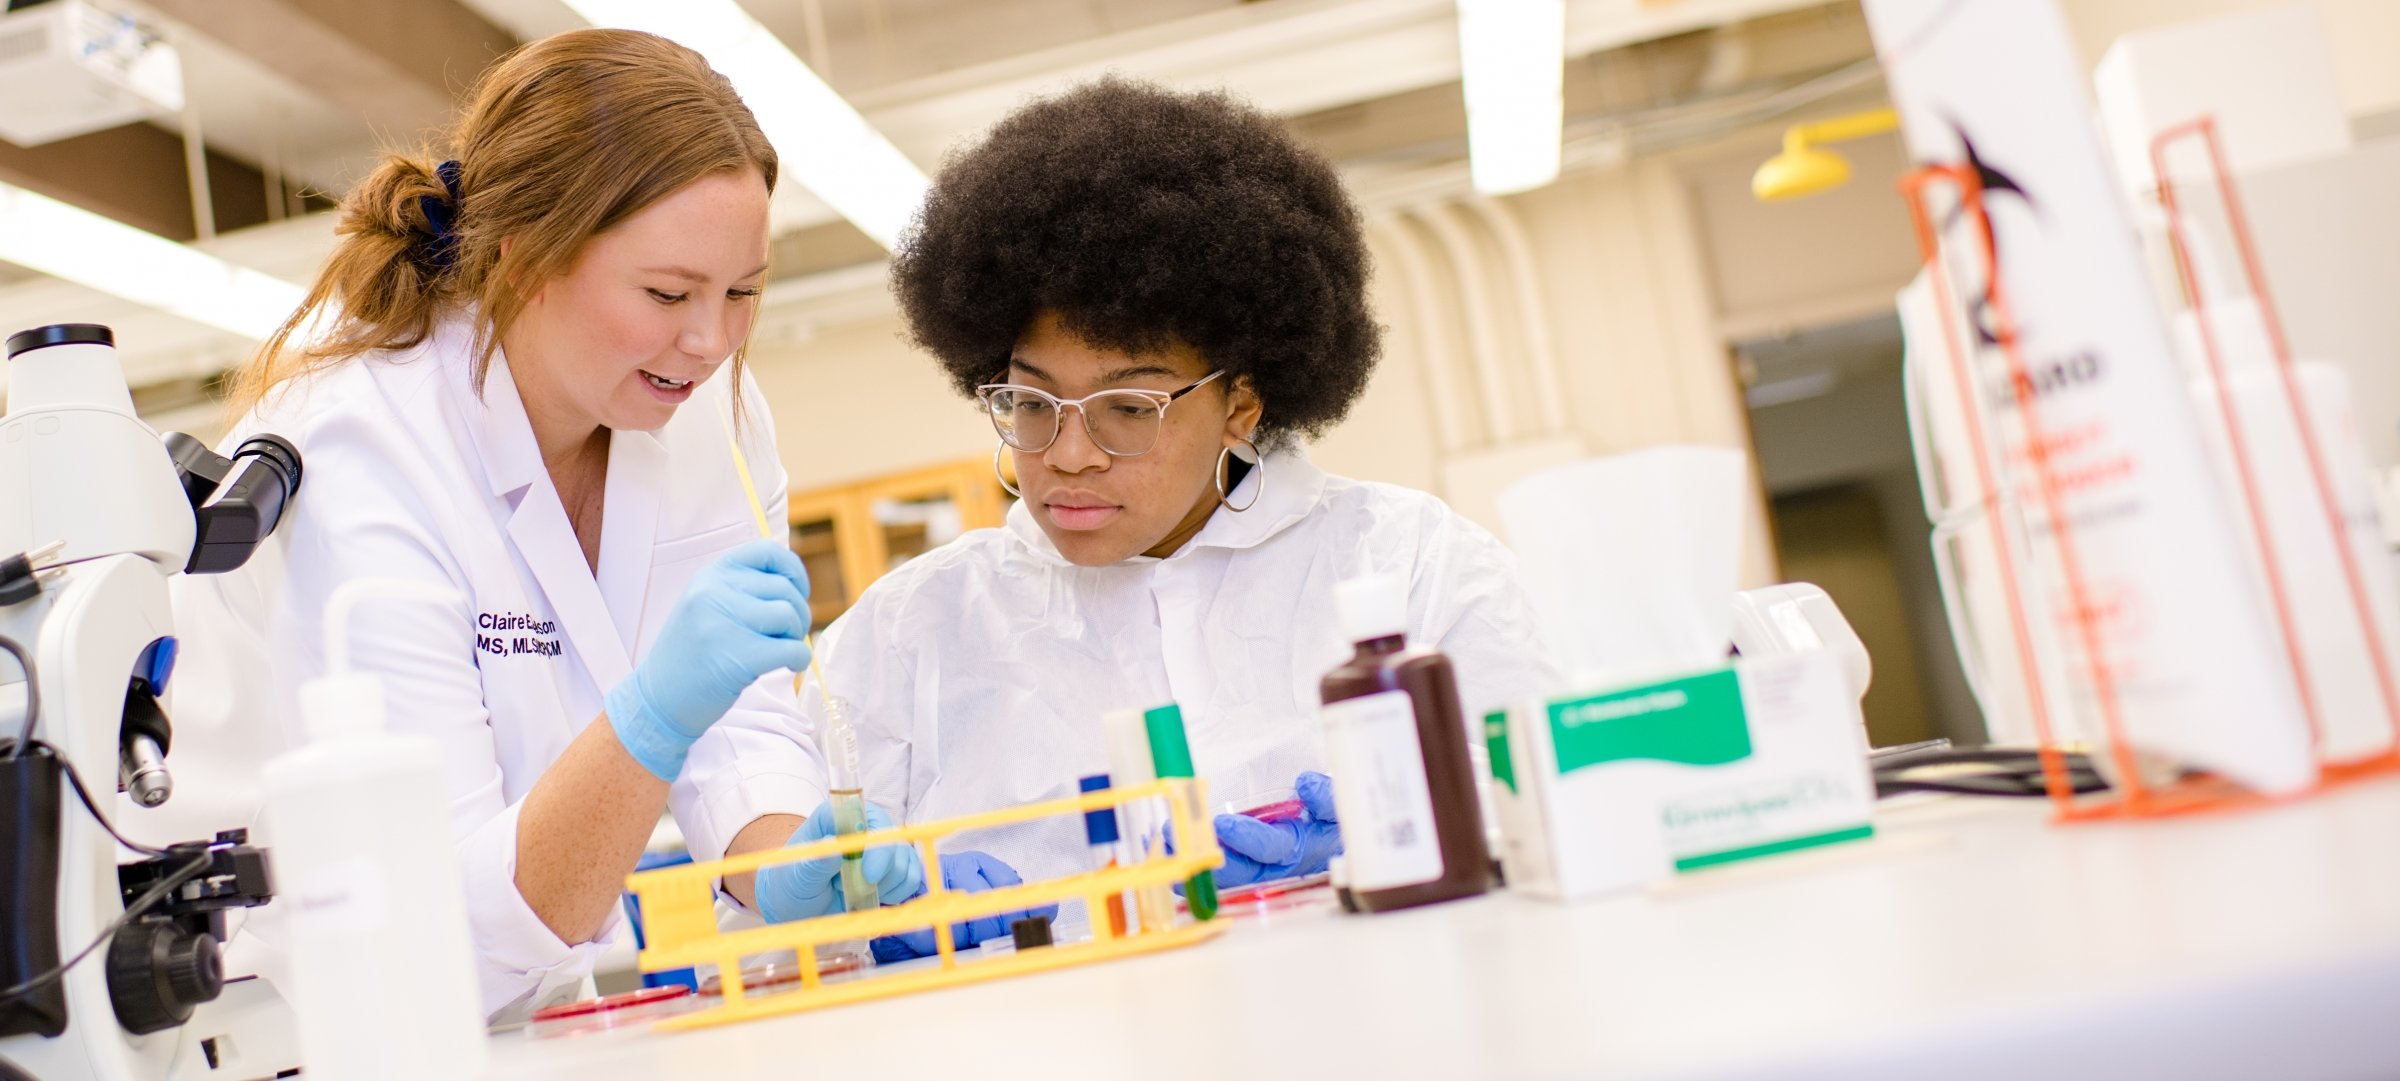 A white woman faculty member talks to a black woman student who is working with test tubes and vials which are on a table next to a microscope.